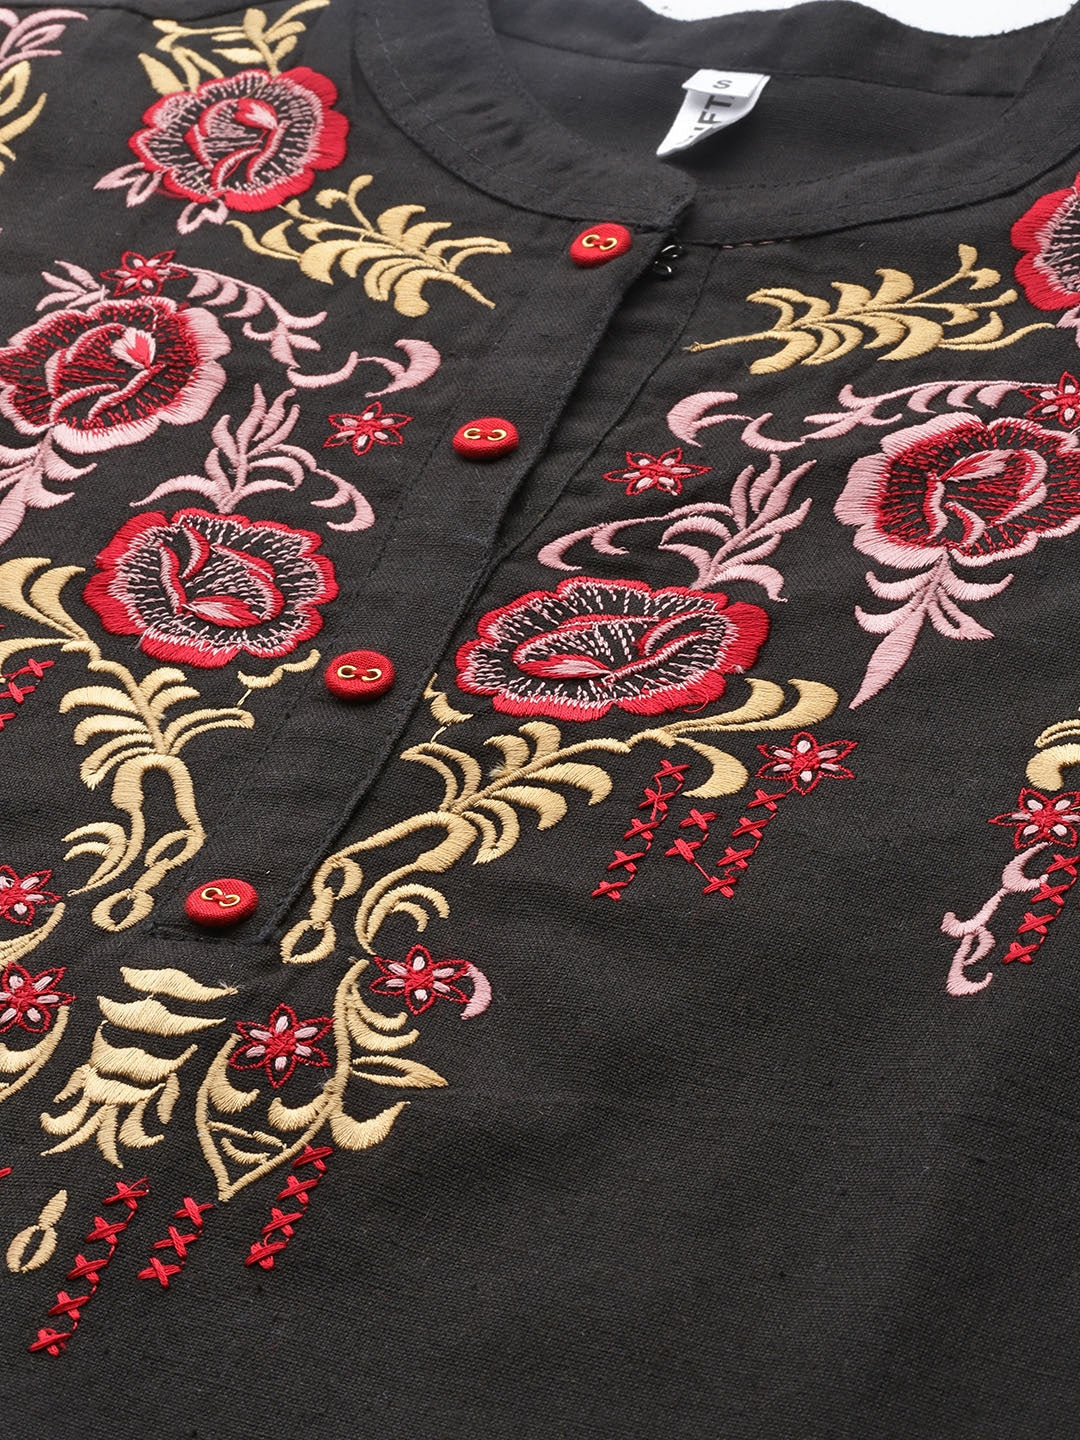 Black Floral Embroidered Top Yufta Store